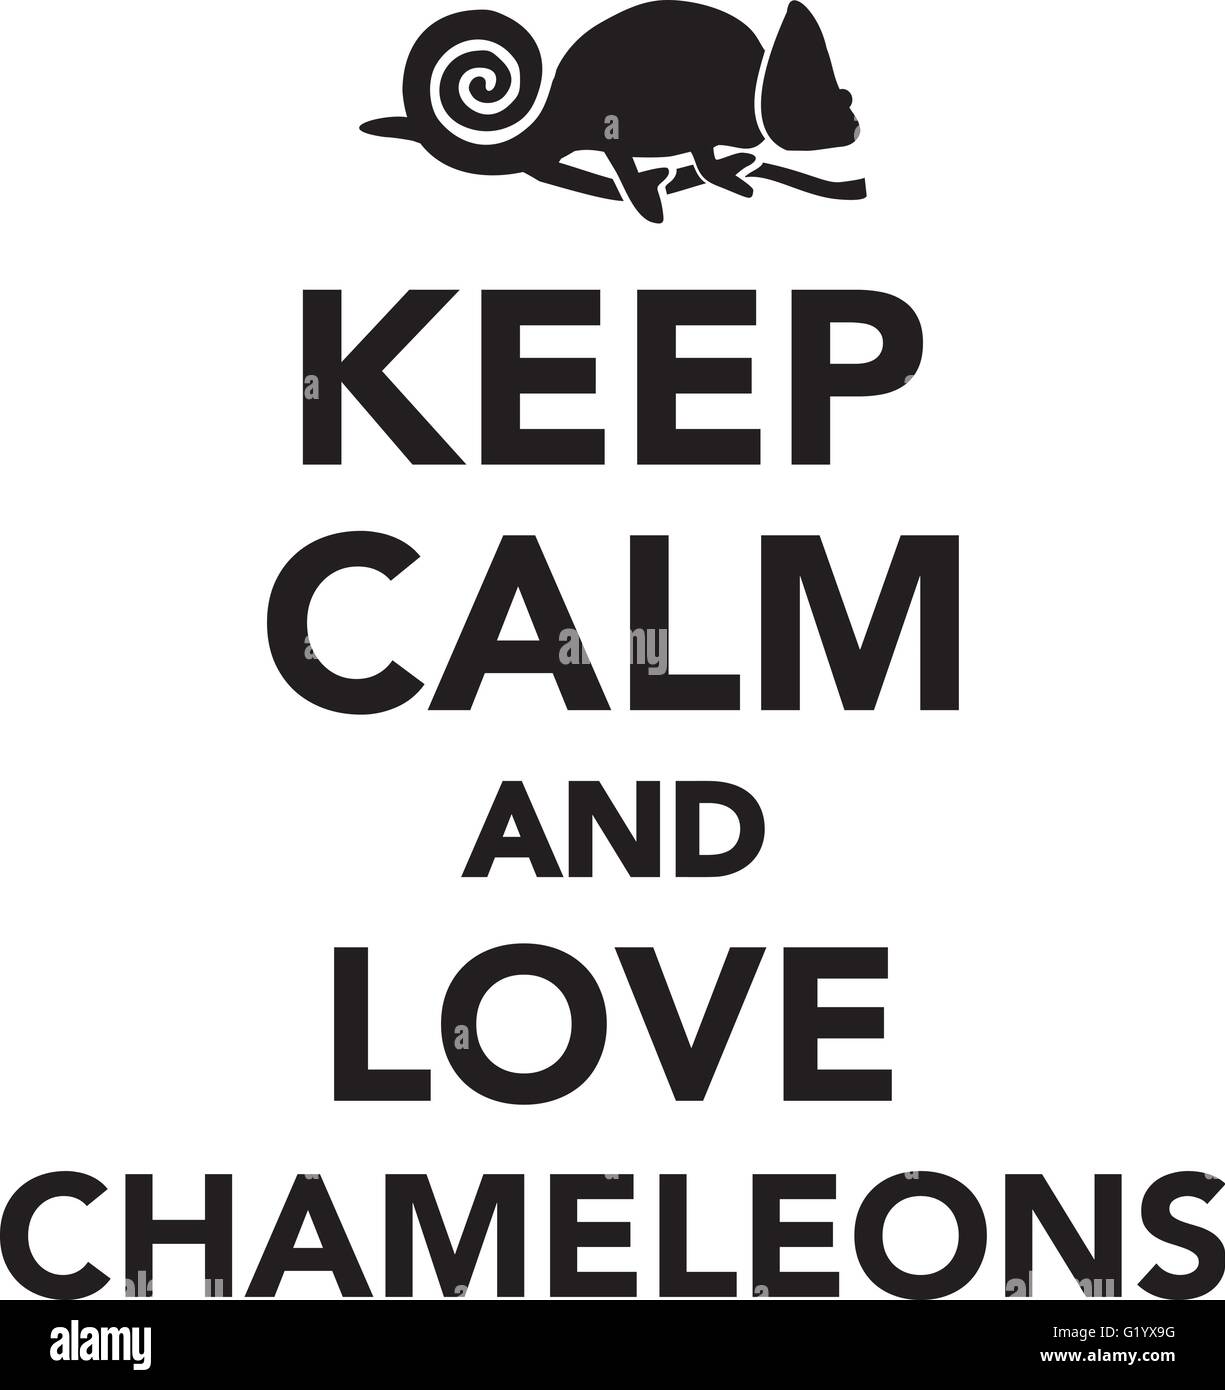 Keep Calm and love chameleons Stock Vector